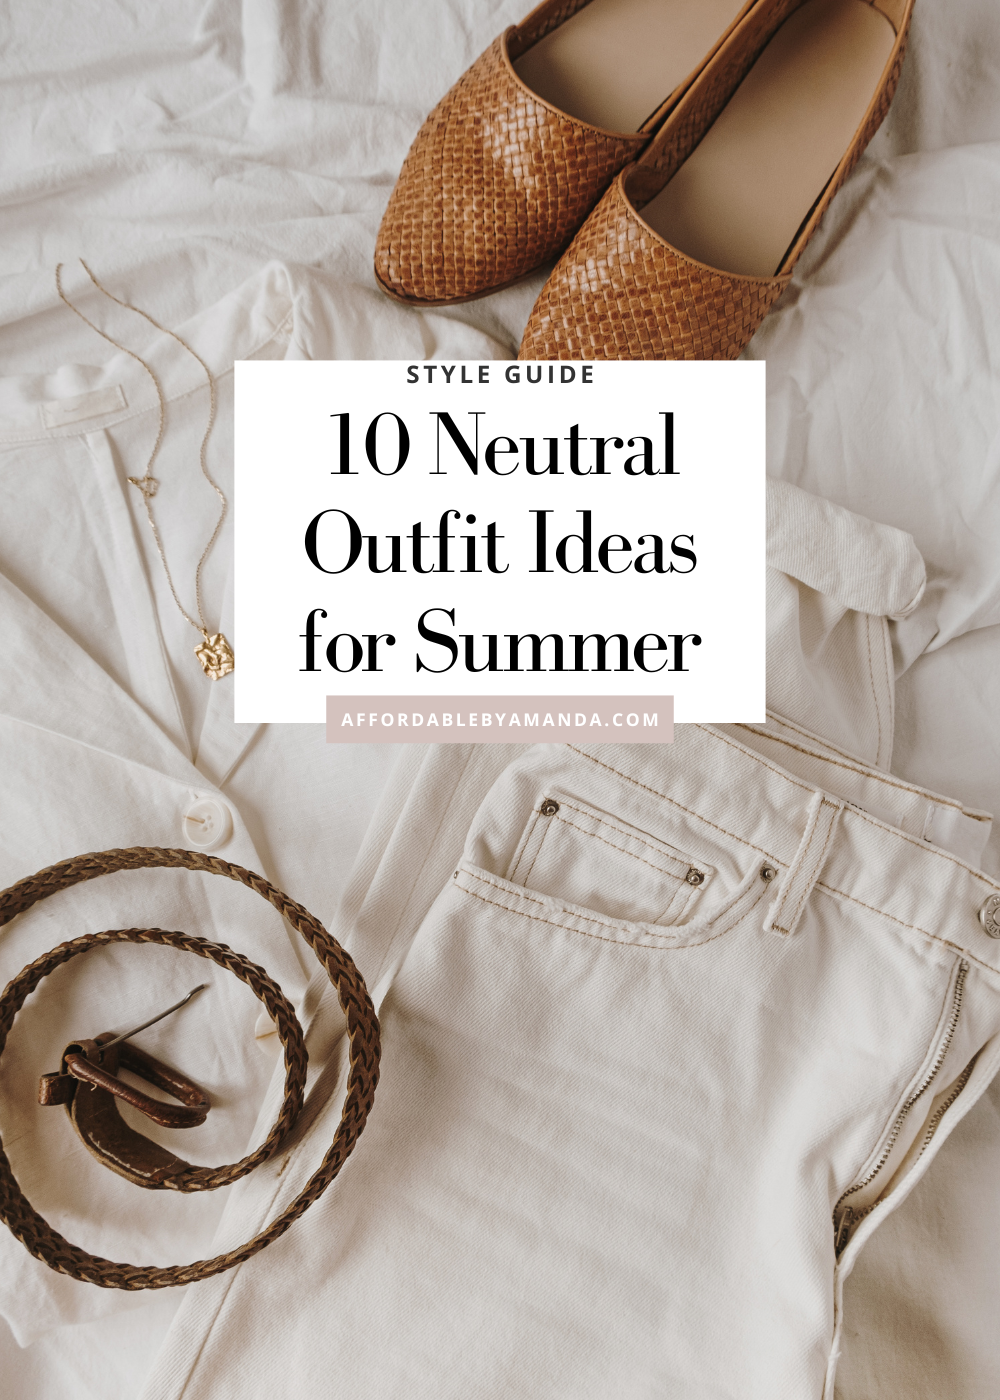 10 Neutral Outfit Ideas for Summer